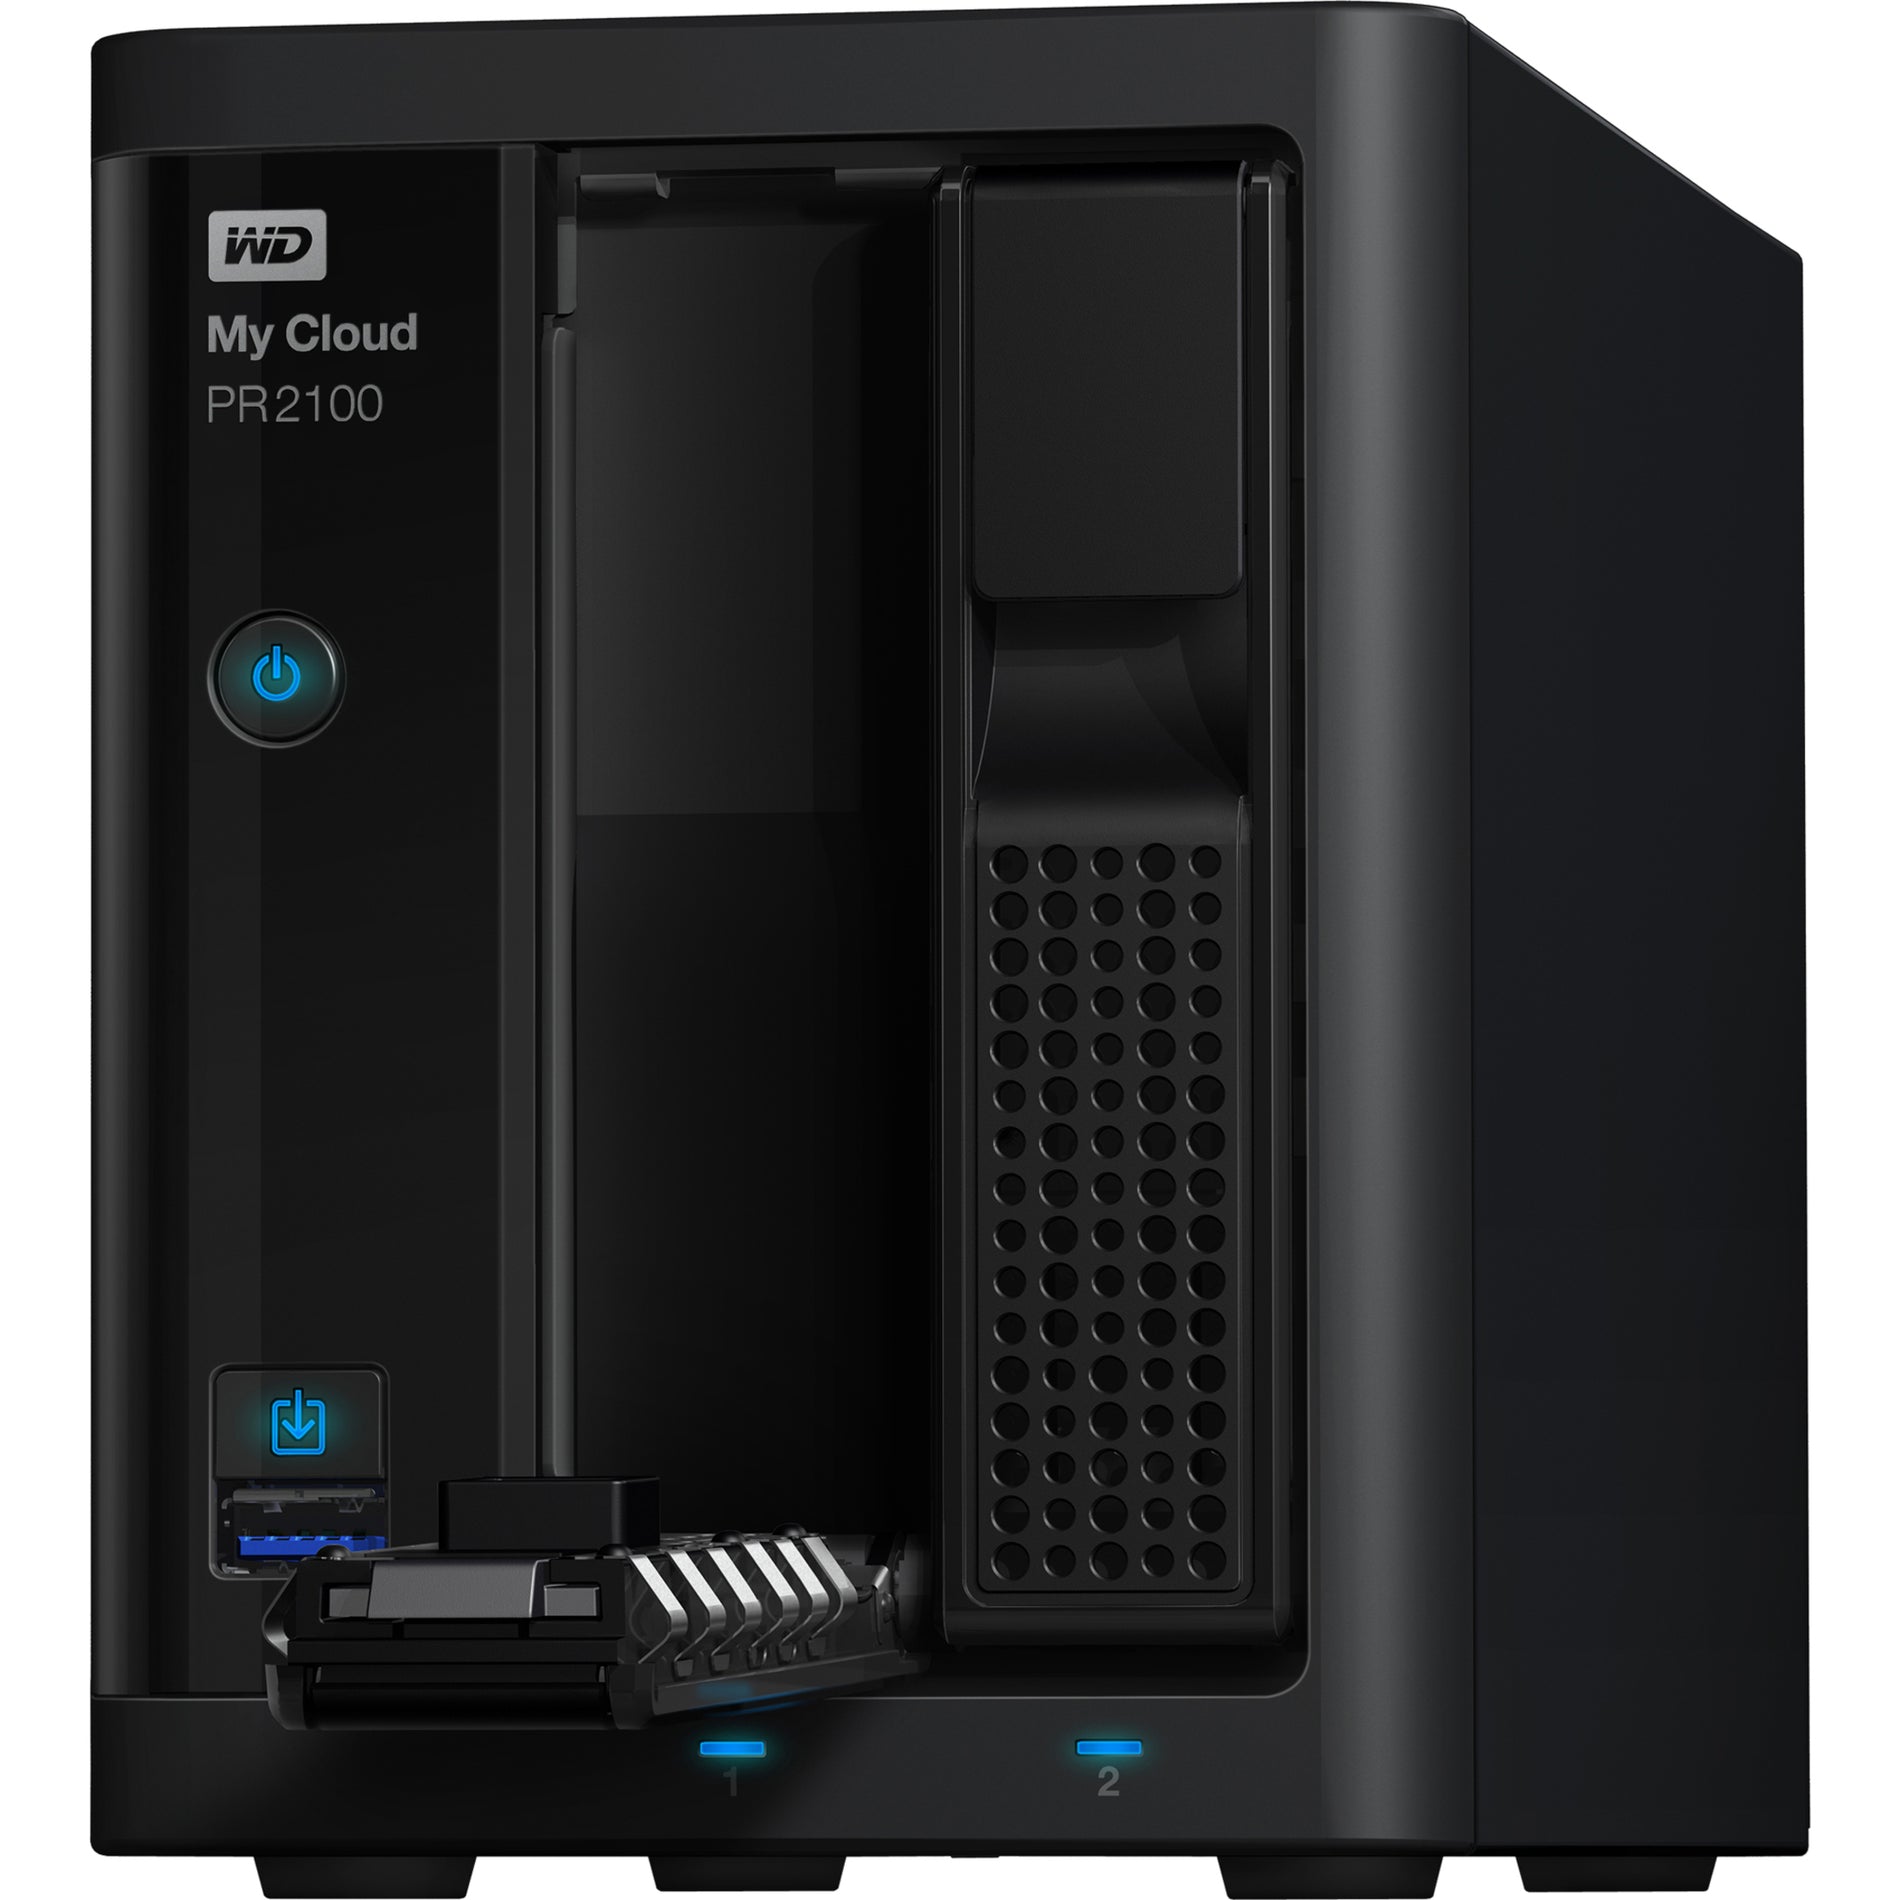 WD WDBBCL0040JBK-NESN 4TB My Cloud PR2100 Pro Series Media Server with Transcoding, NAS - Network Attached Storage